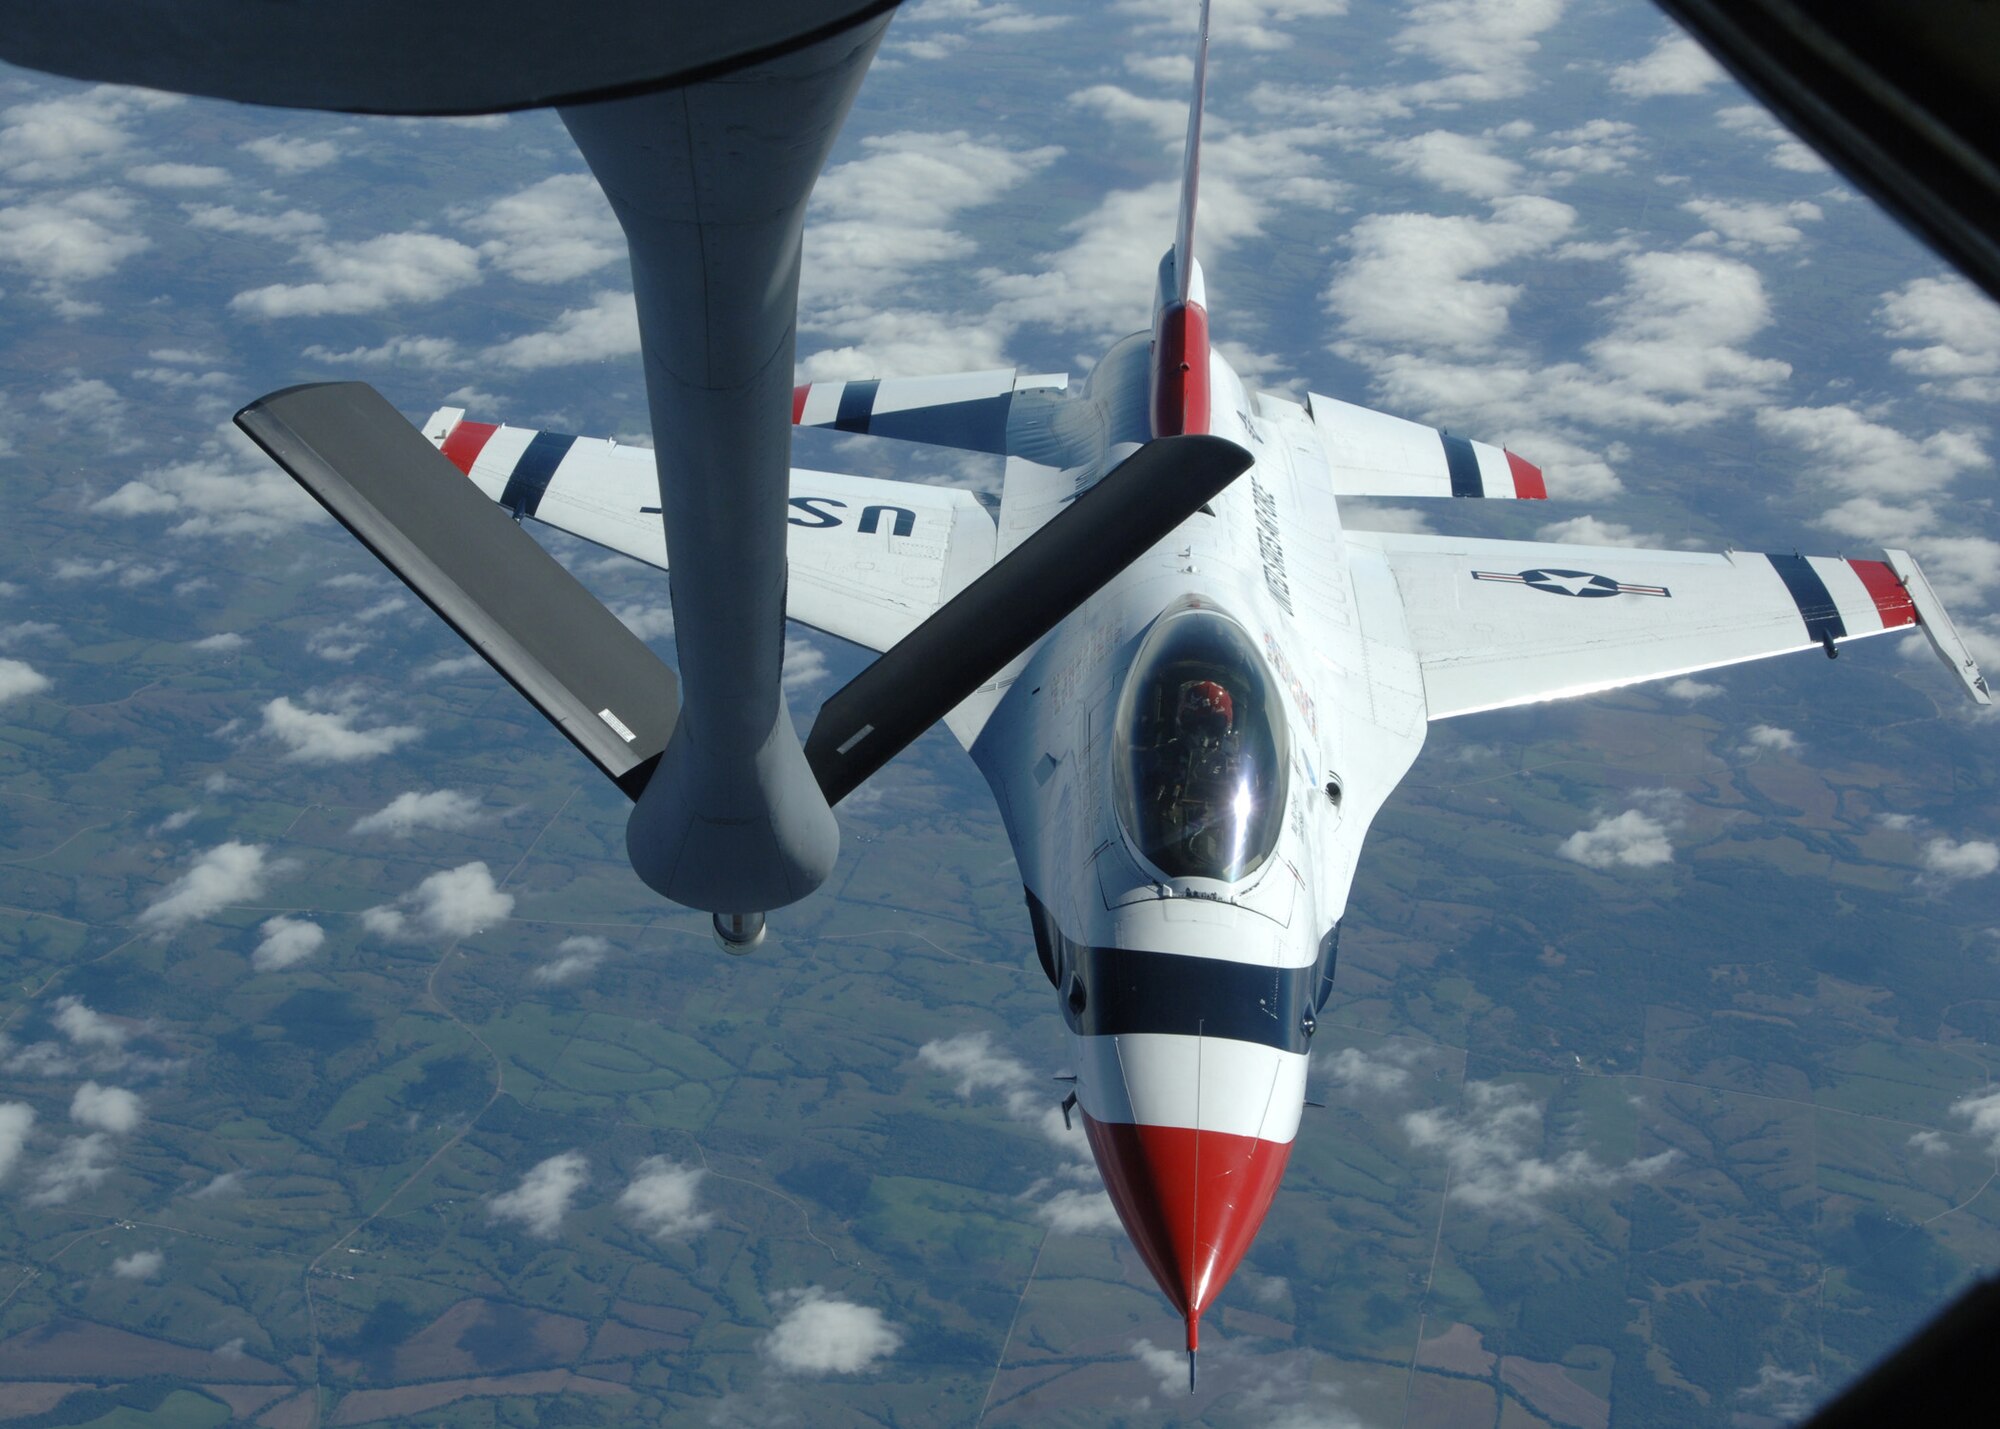 GRAND FORKS AIR FORCE BASE, N.D. -- A U.S. Air Force Thunderbirds pilot, pulls away after taking on fuel from a 319th Air Refueling Wing tanker Oct. 1 over the Midwest during a refueling mission. The Thunderbirds are the Air Force?s premier demonstration squadron. The F-16 team represents the Air Force throughout the nation and abroad. (U.S. Air Force photo by Airman 1st Class Chad M. Kellum)